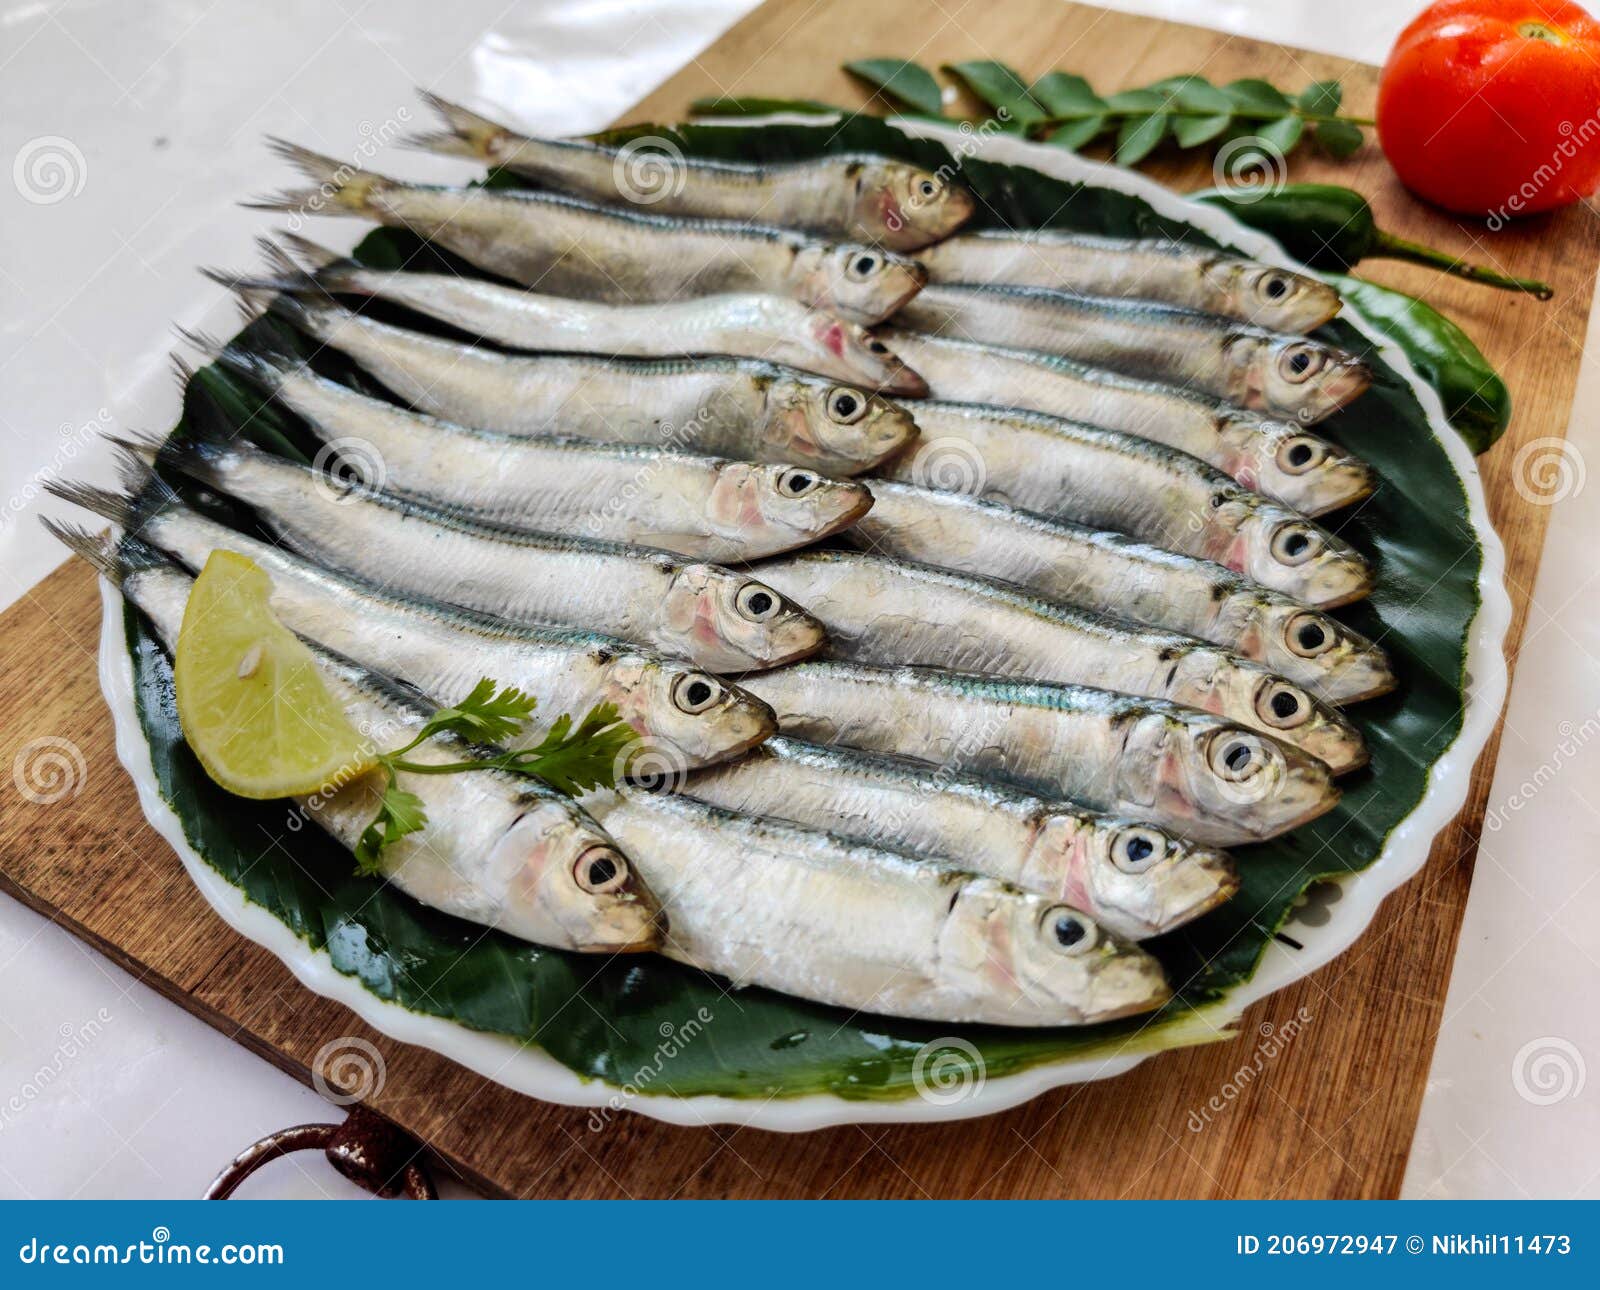 closeup view of fresh indian oil sardine decorated with herbs and vegetables selective focus.white background